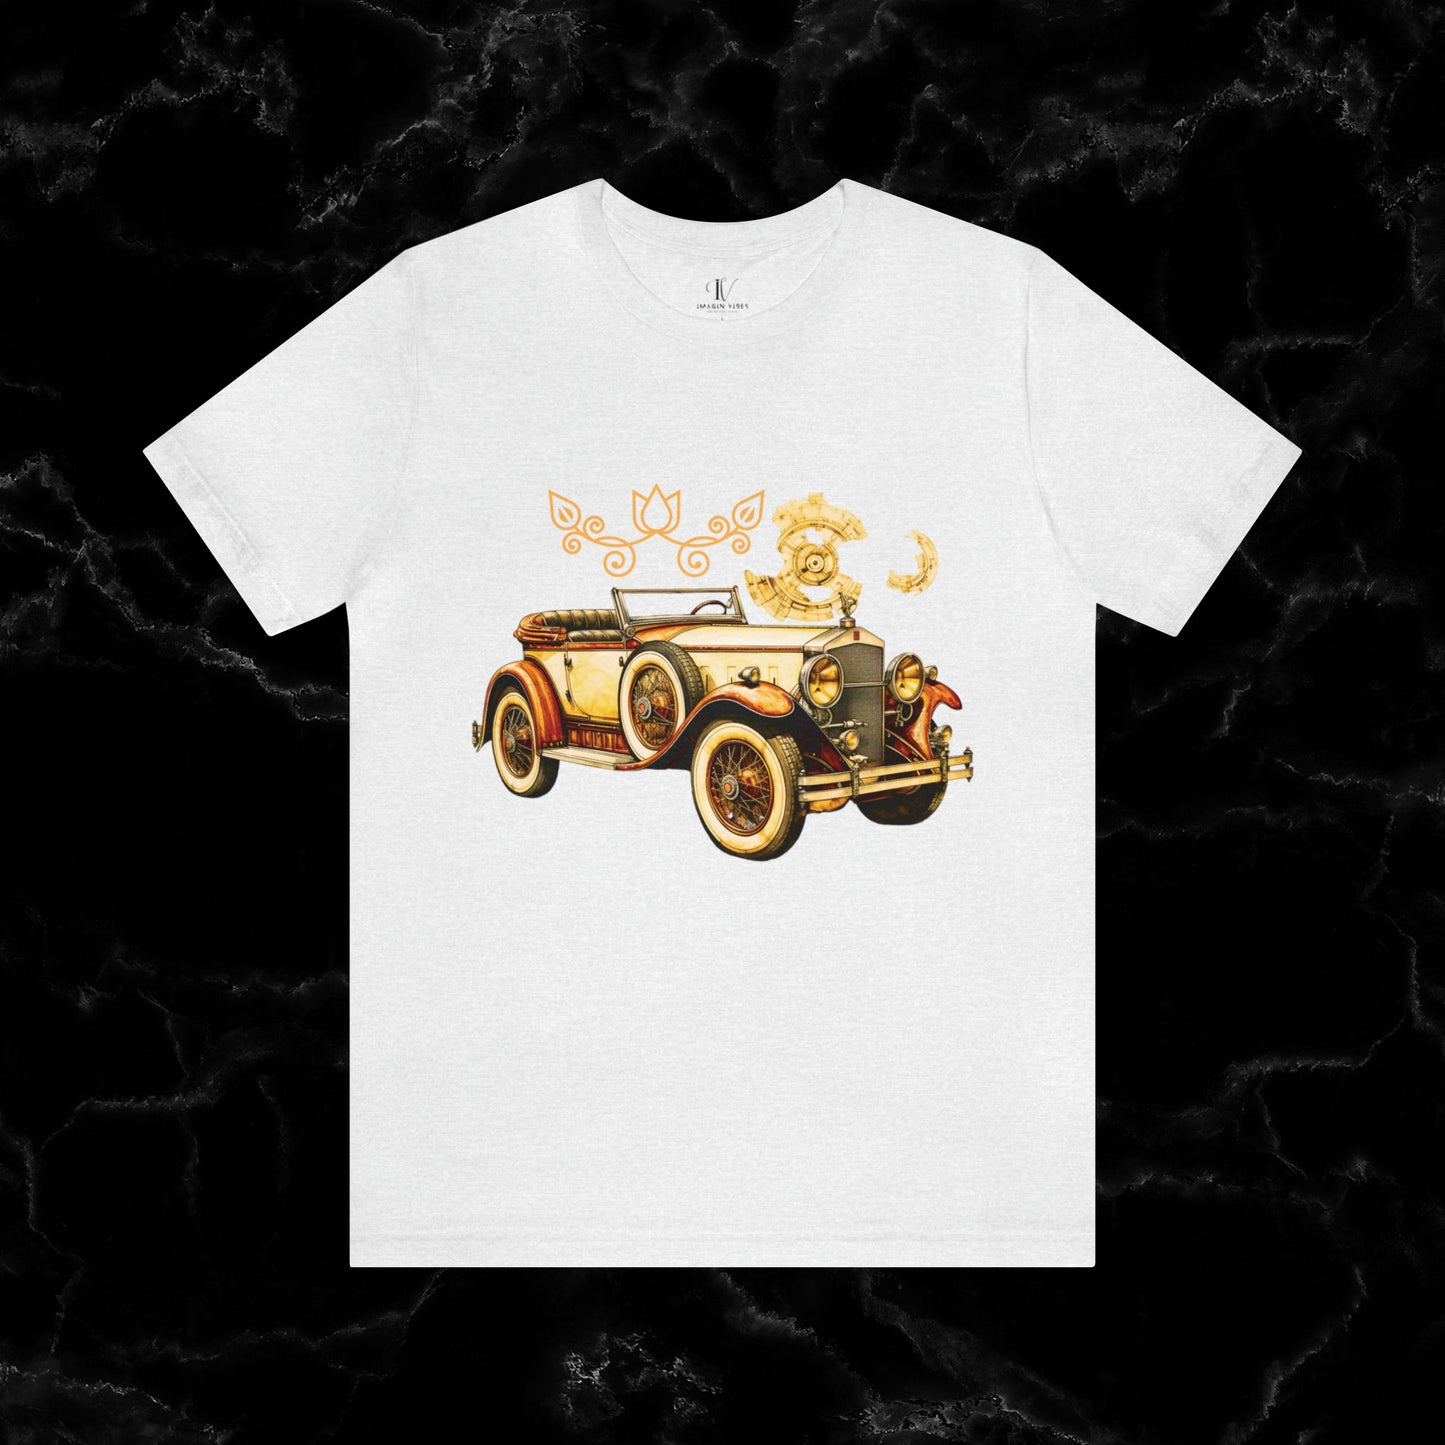 Vintage Car Enthusiast T-Shirt - Classic Wheels and Timeless Appeal for Automotive Enthusiast T-Shirt Ash S 